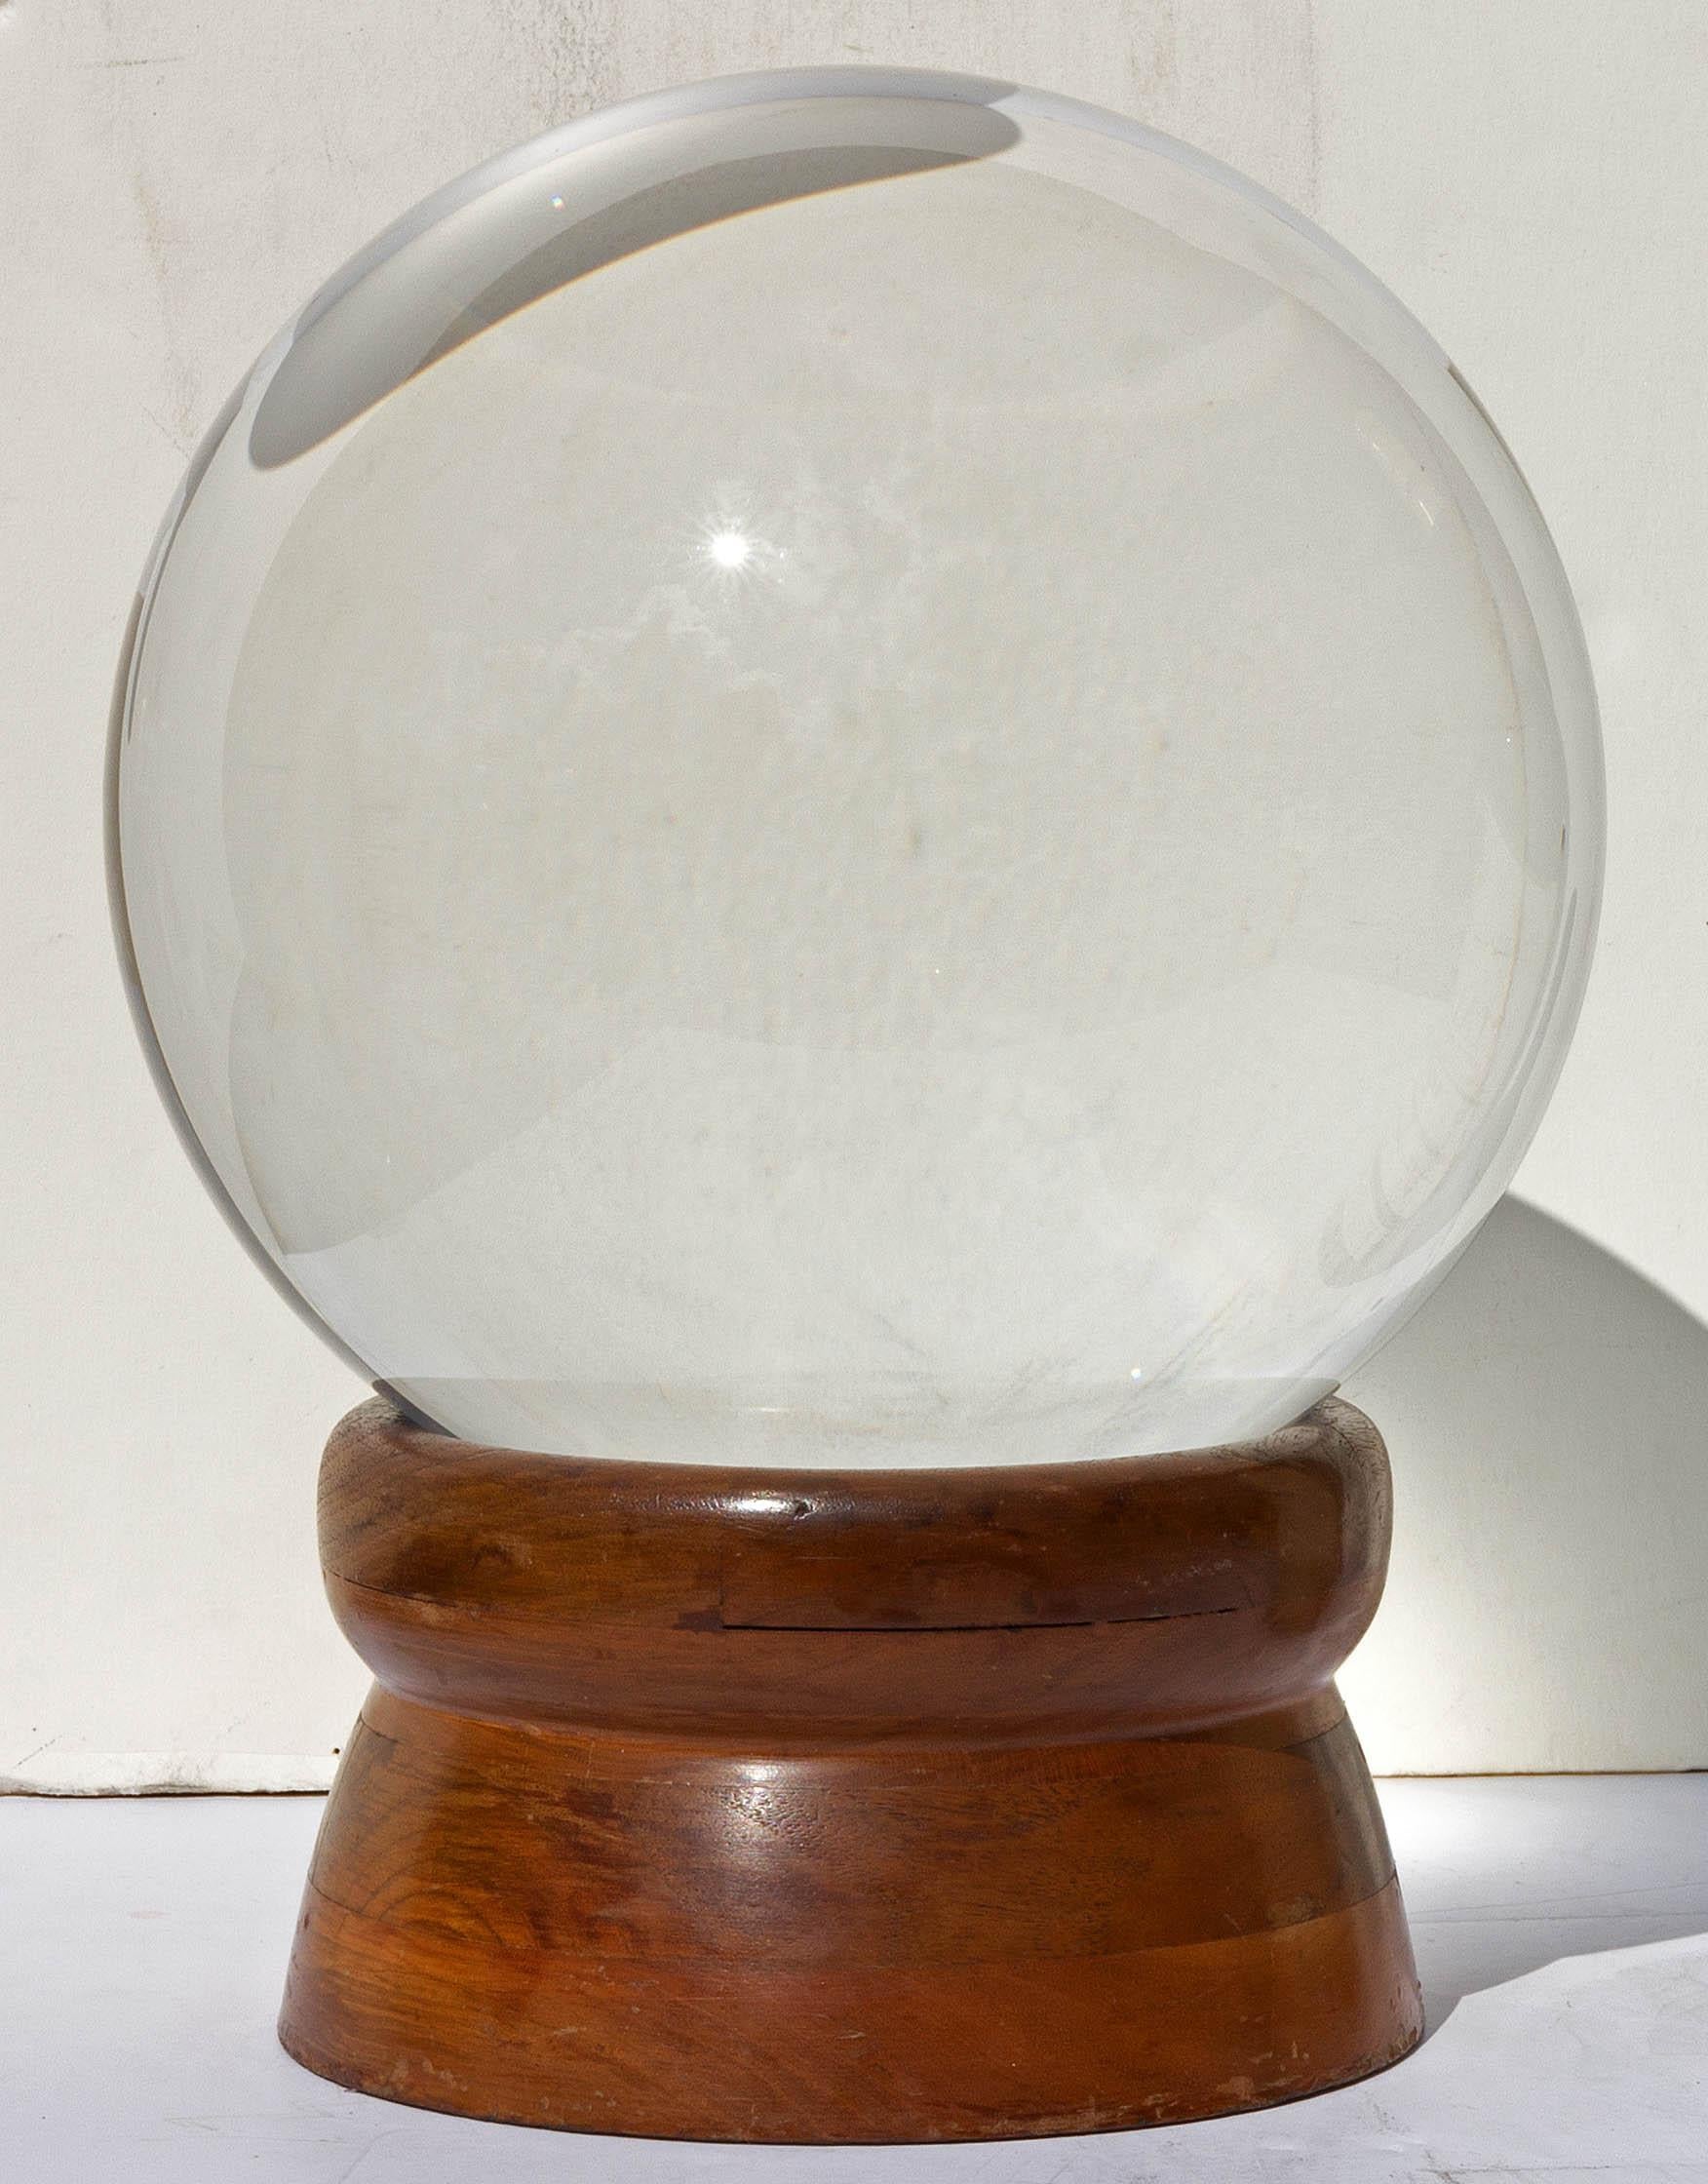 Antique fortune teller's crystal glass ball, early 20th century. Crystal is of the finest quality with no bubbles or inclusions. Turned hardwood base retains original silk velvet pad on underside.